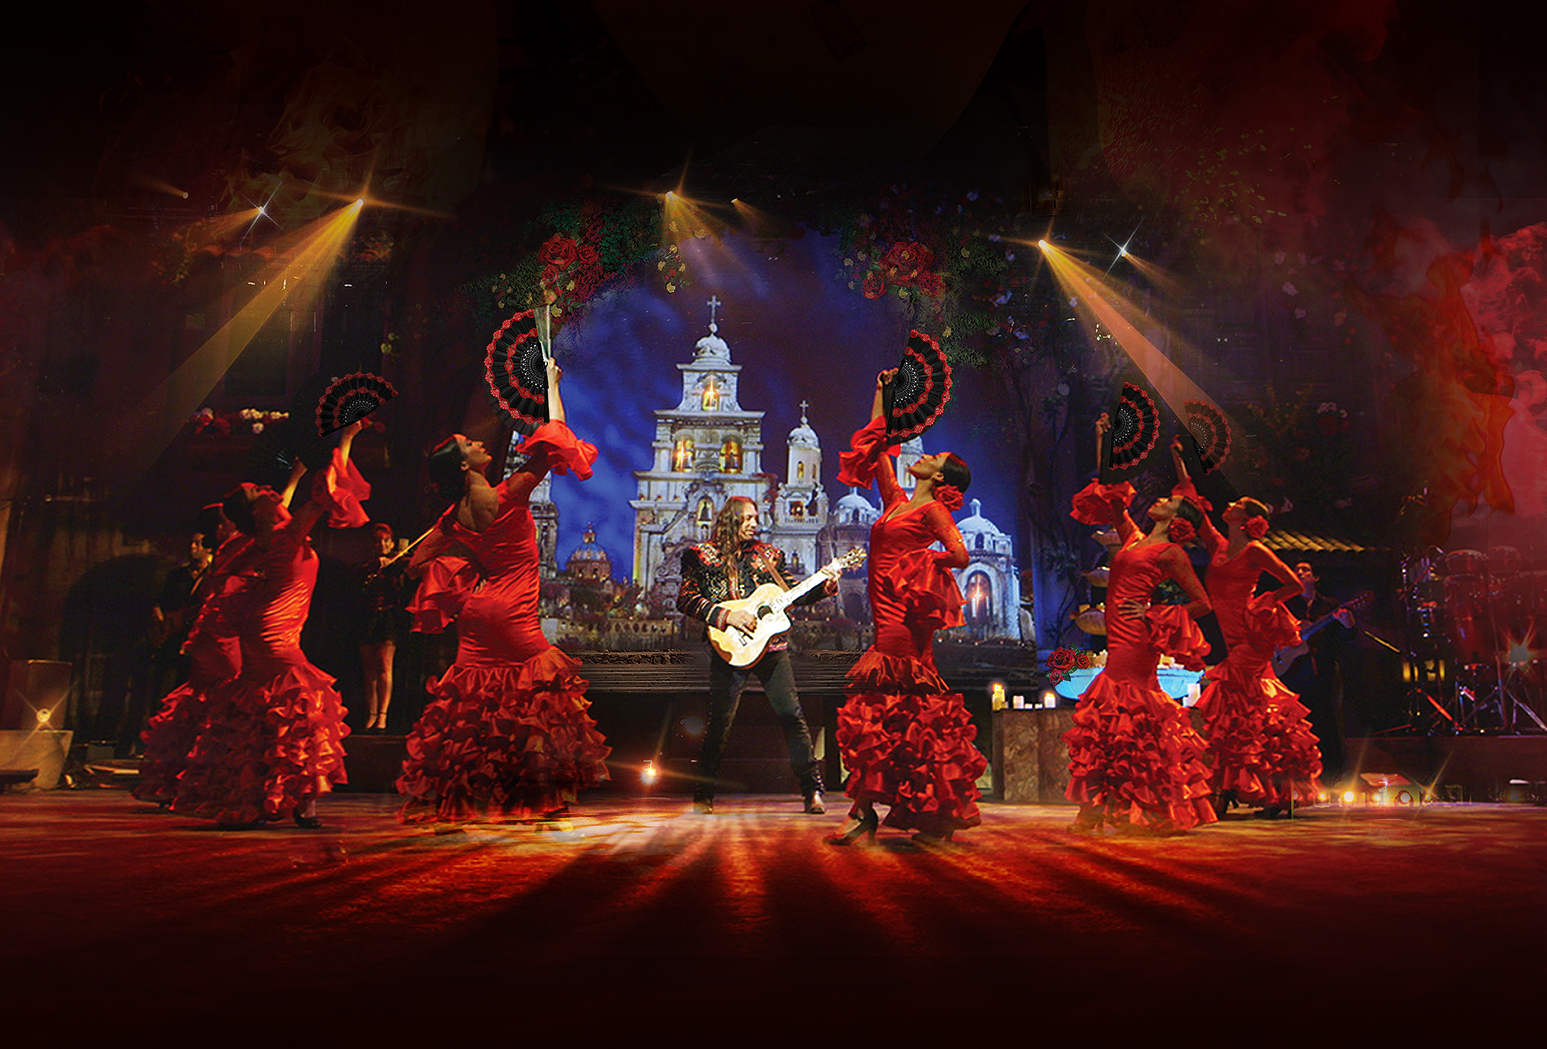 Six flamenco dancers in red holding fans surround Benise, who is playing an acoustic guitar.